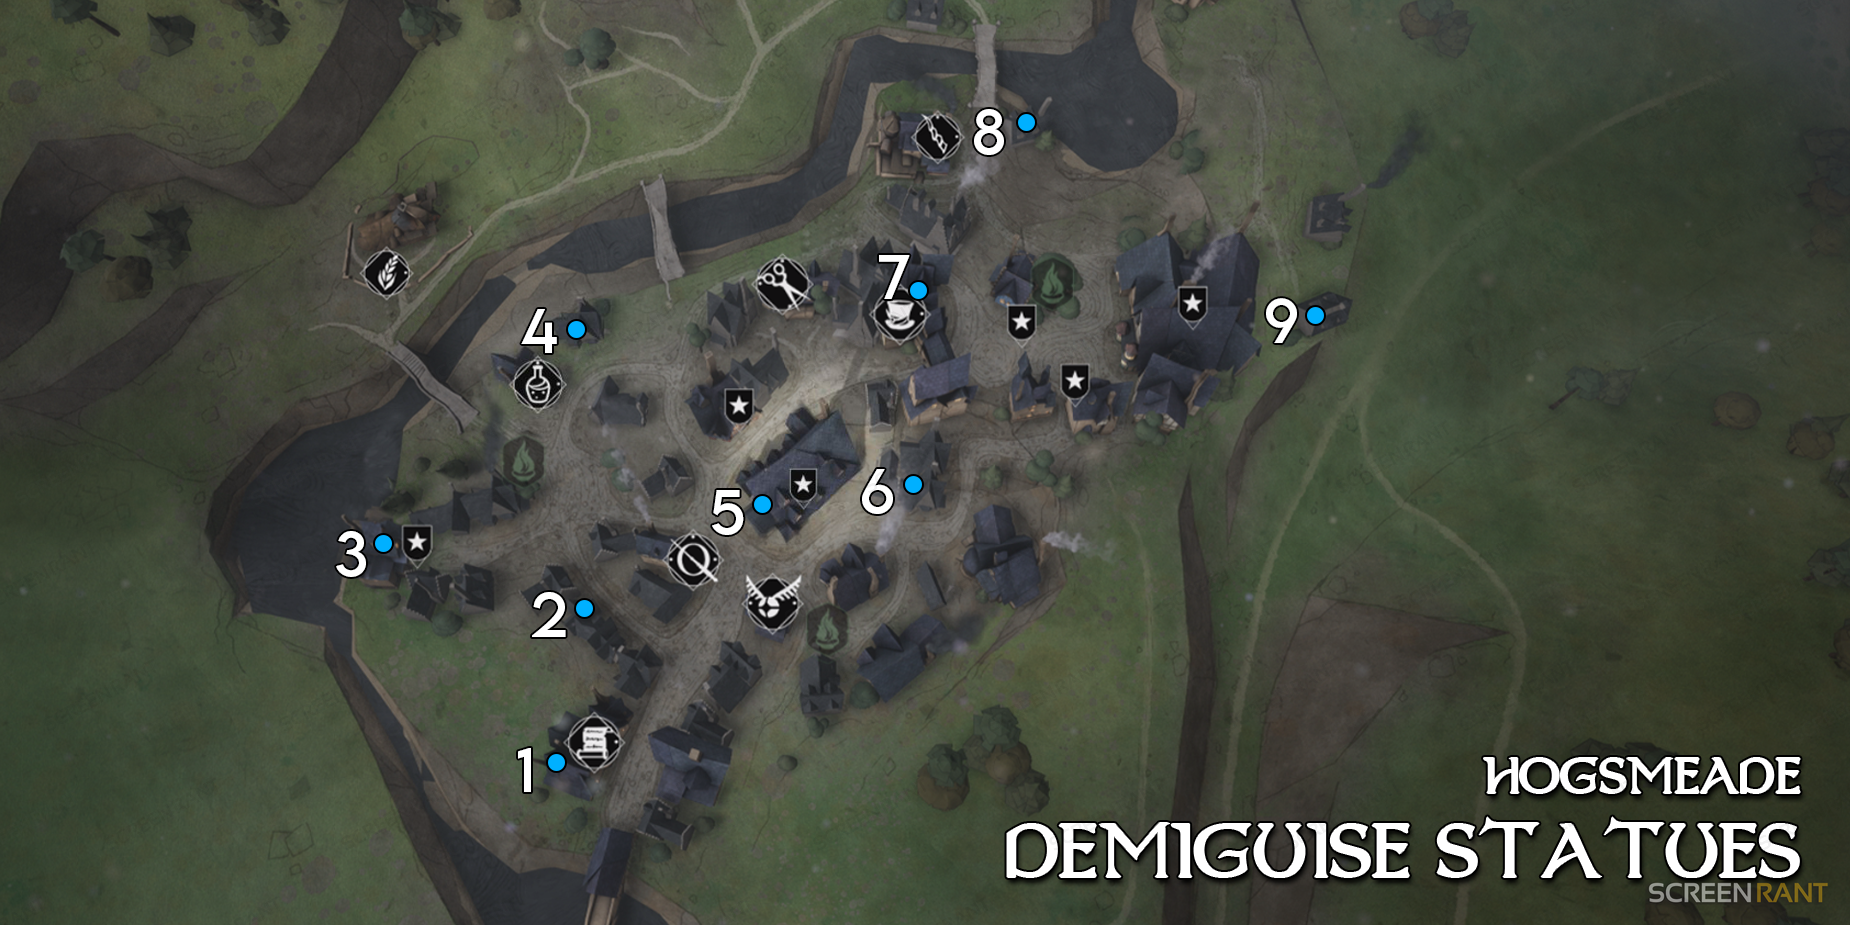 Hogsmeade demiguise statue locations in old Hogwarts map